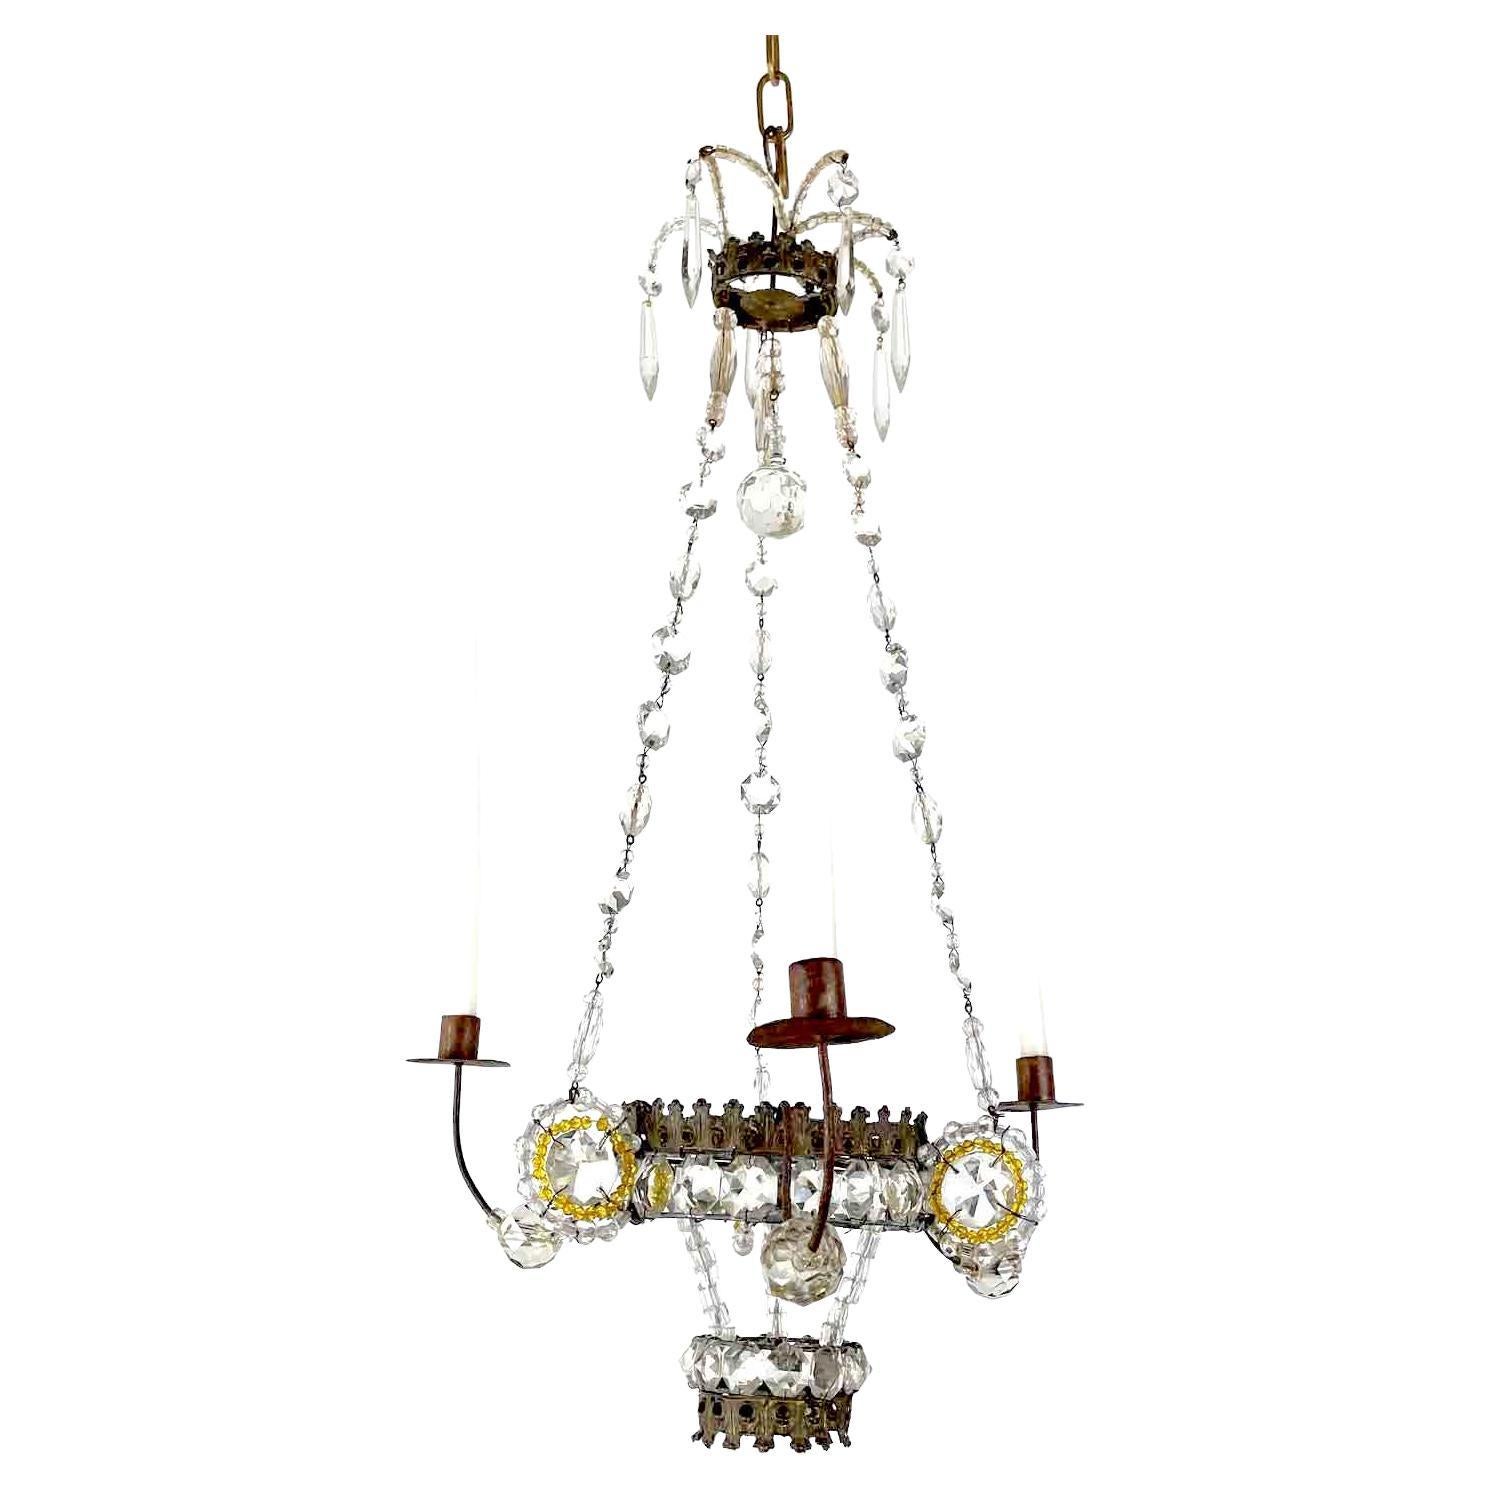 19th Century Italian Empire Beaded Crystal Candle Chandelier